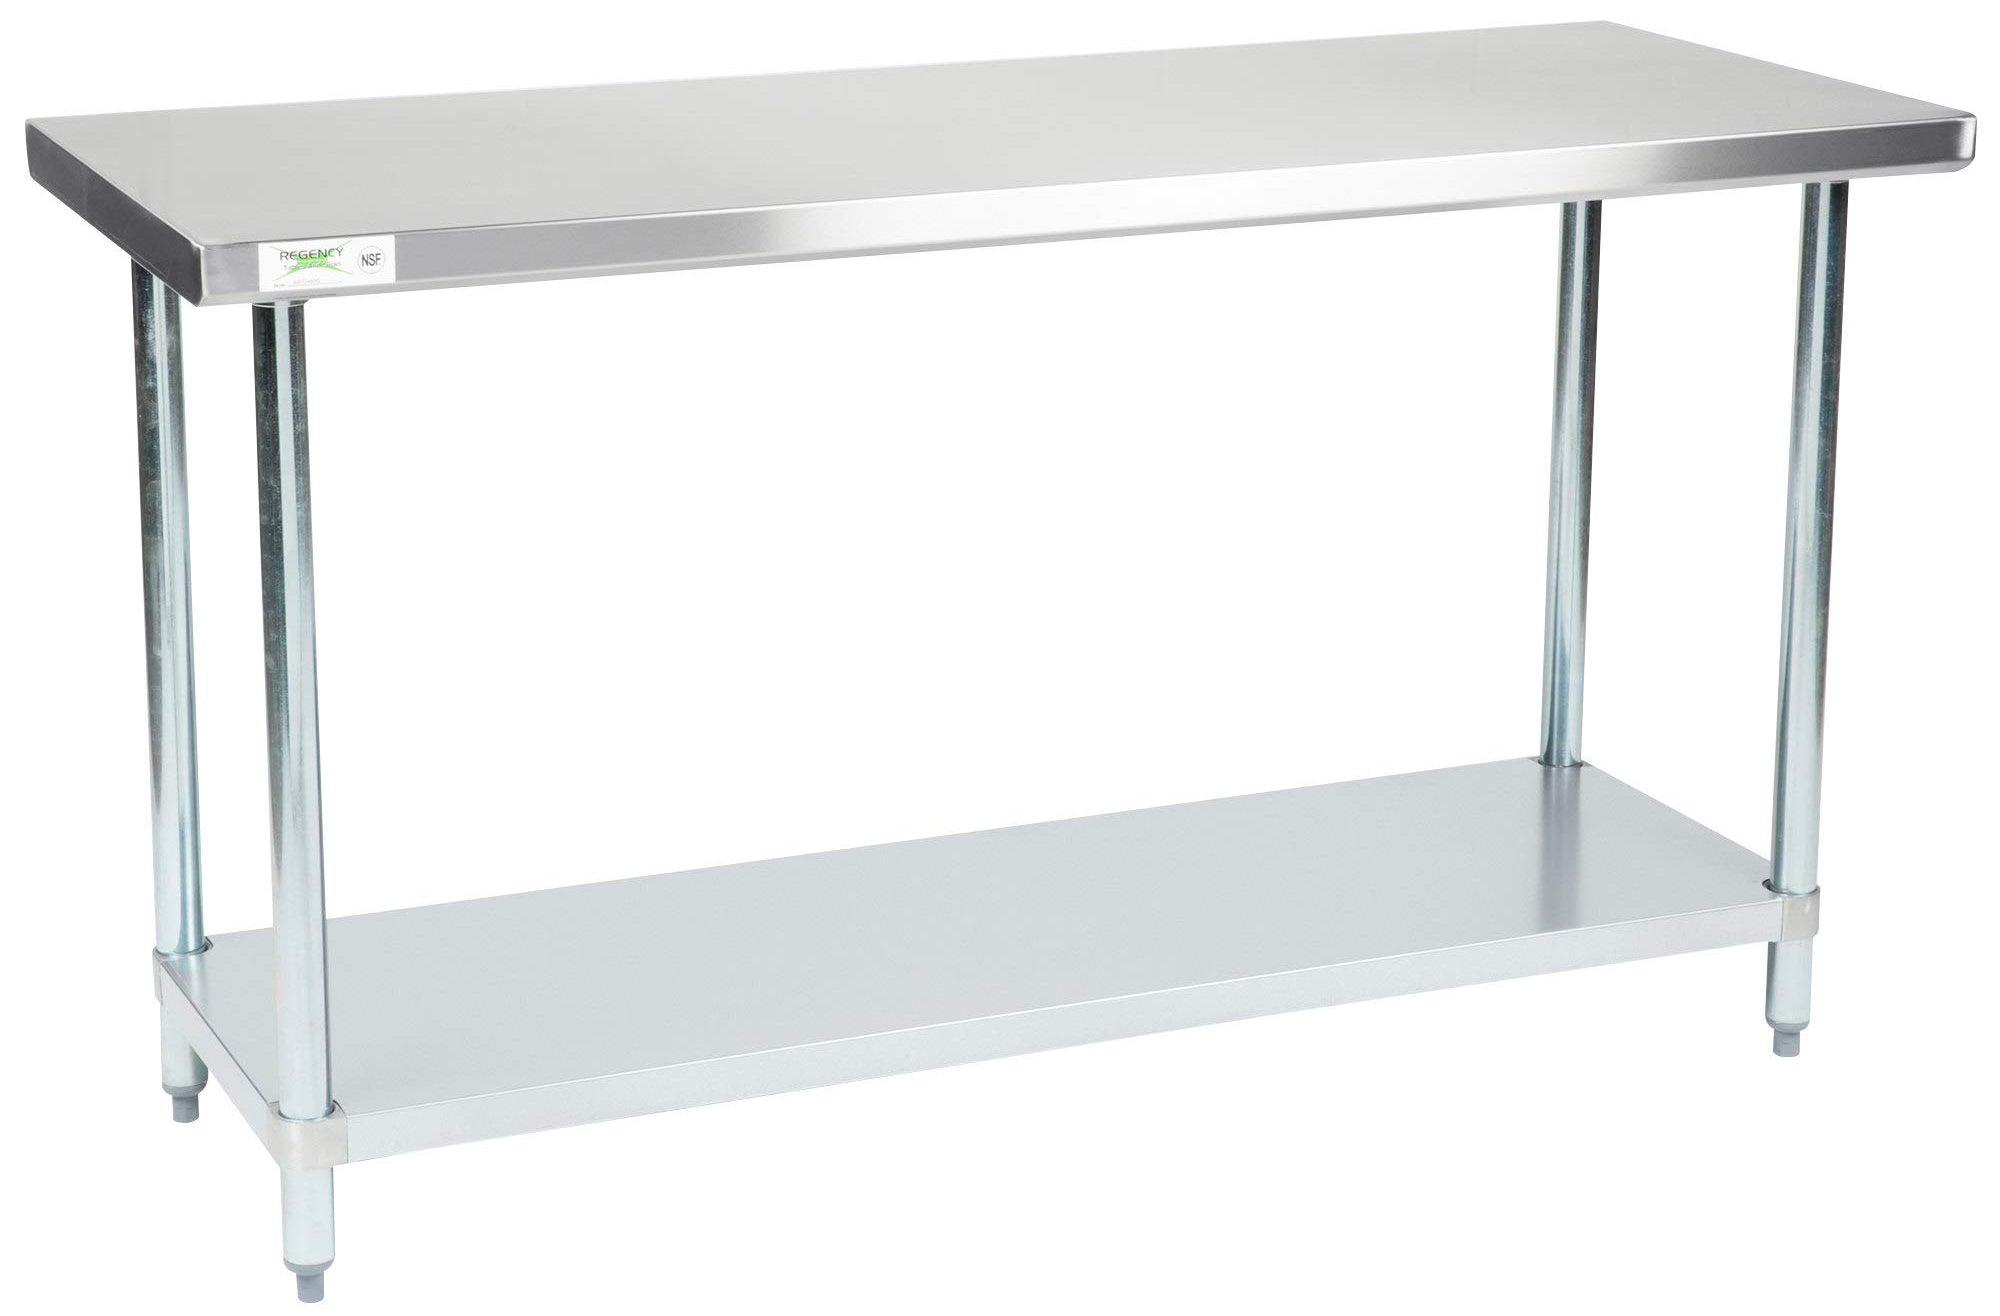 commercial kitchen small stainless steel table